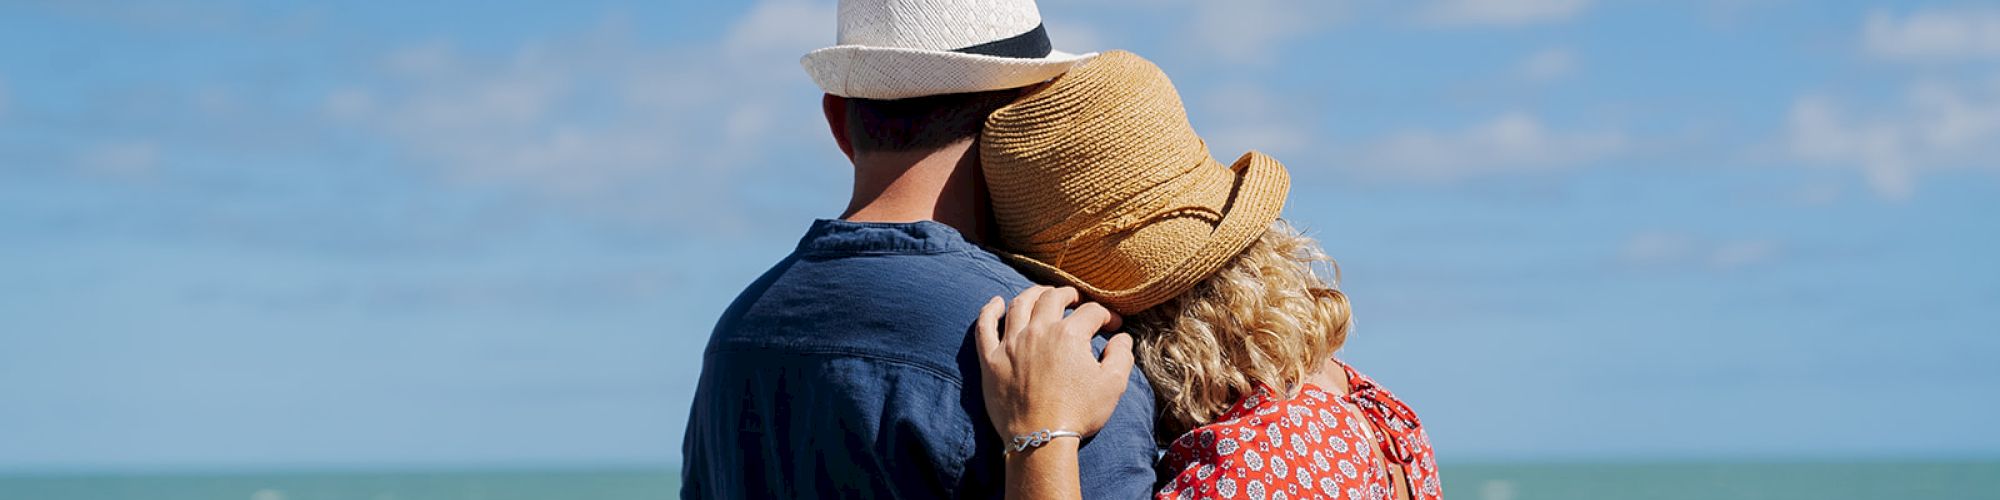 A couple in hats is embracing while looking at the ocean from a railing, under a sunny sky with scattered clouds, creating a peaceful scene.